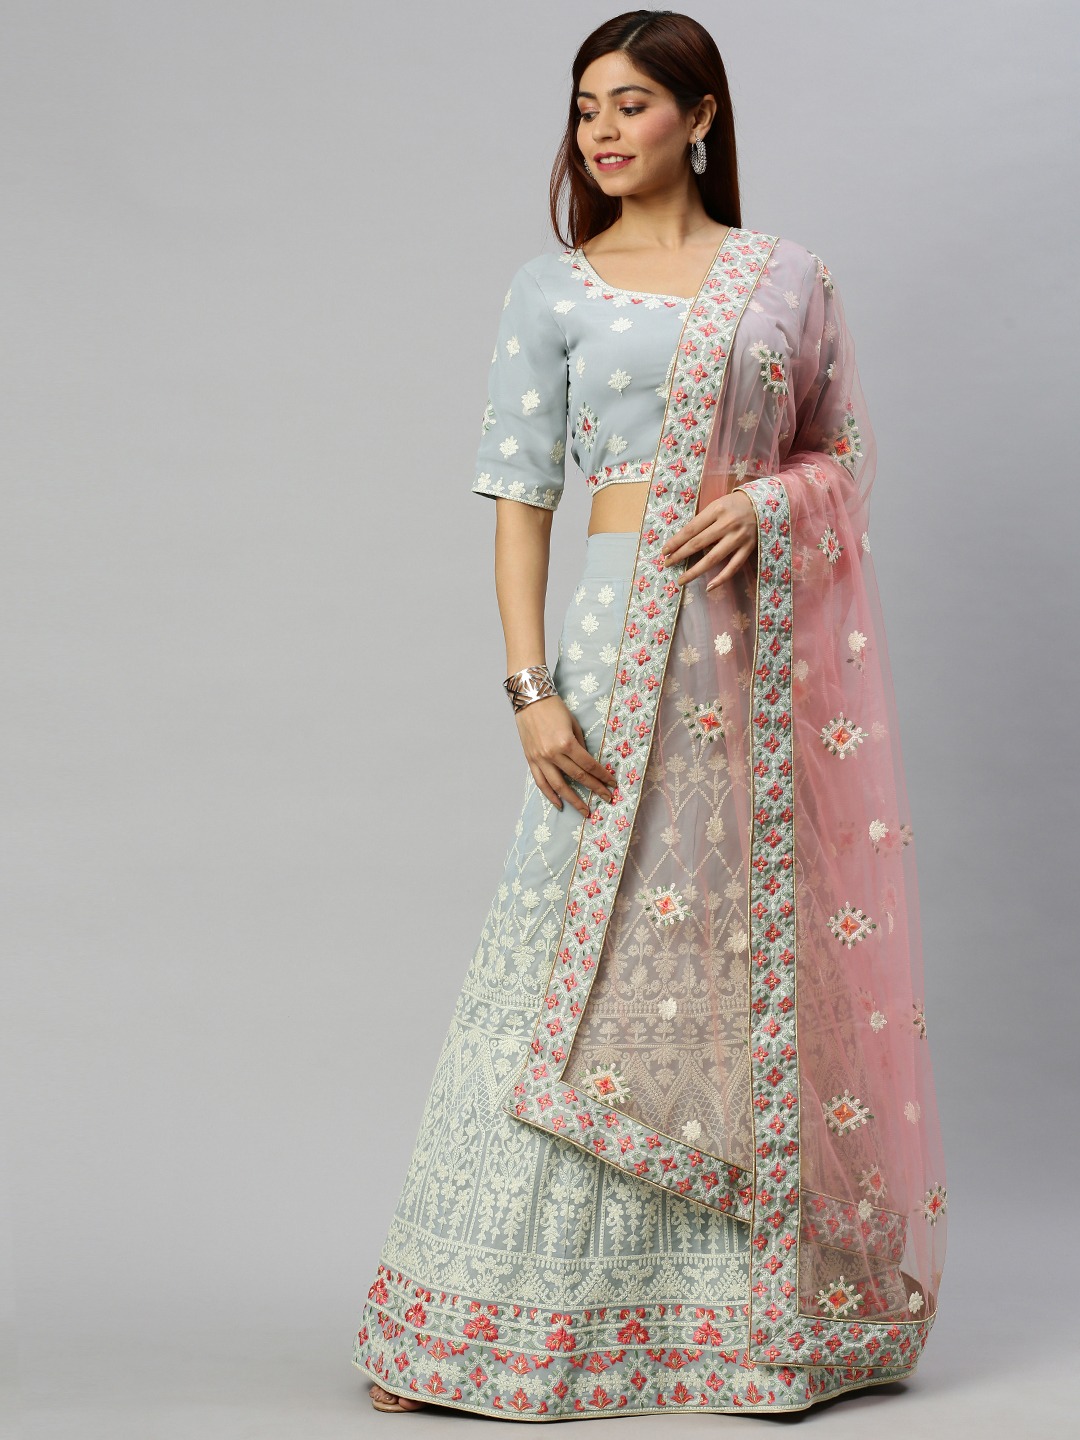 Discover Exceptional Indian Designer Wear At KKASHI Products Page